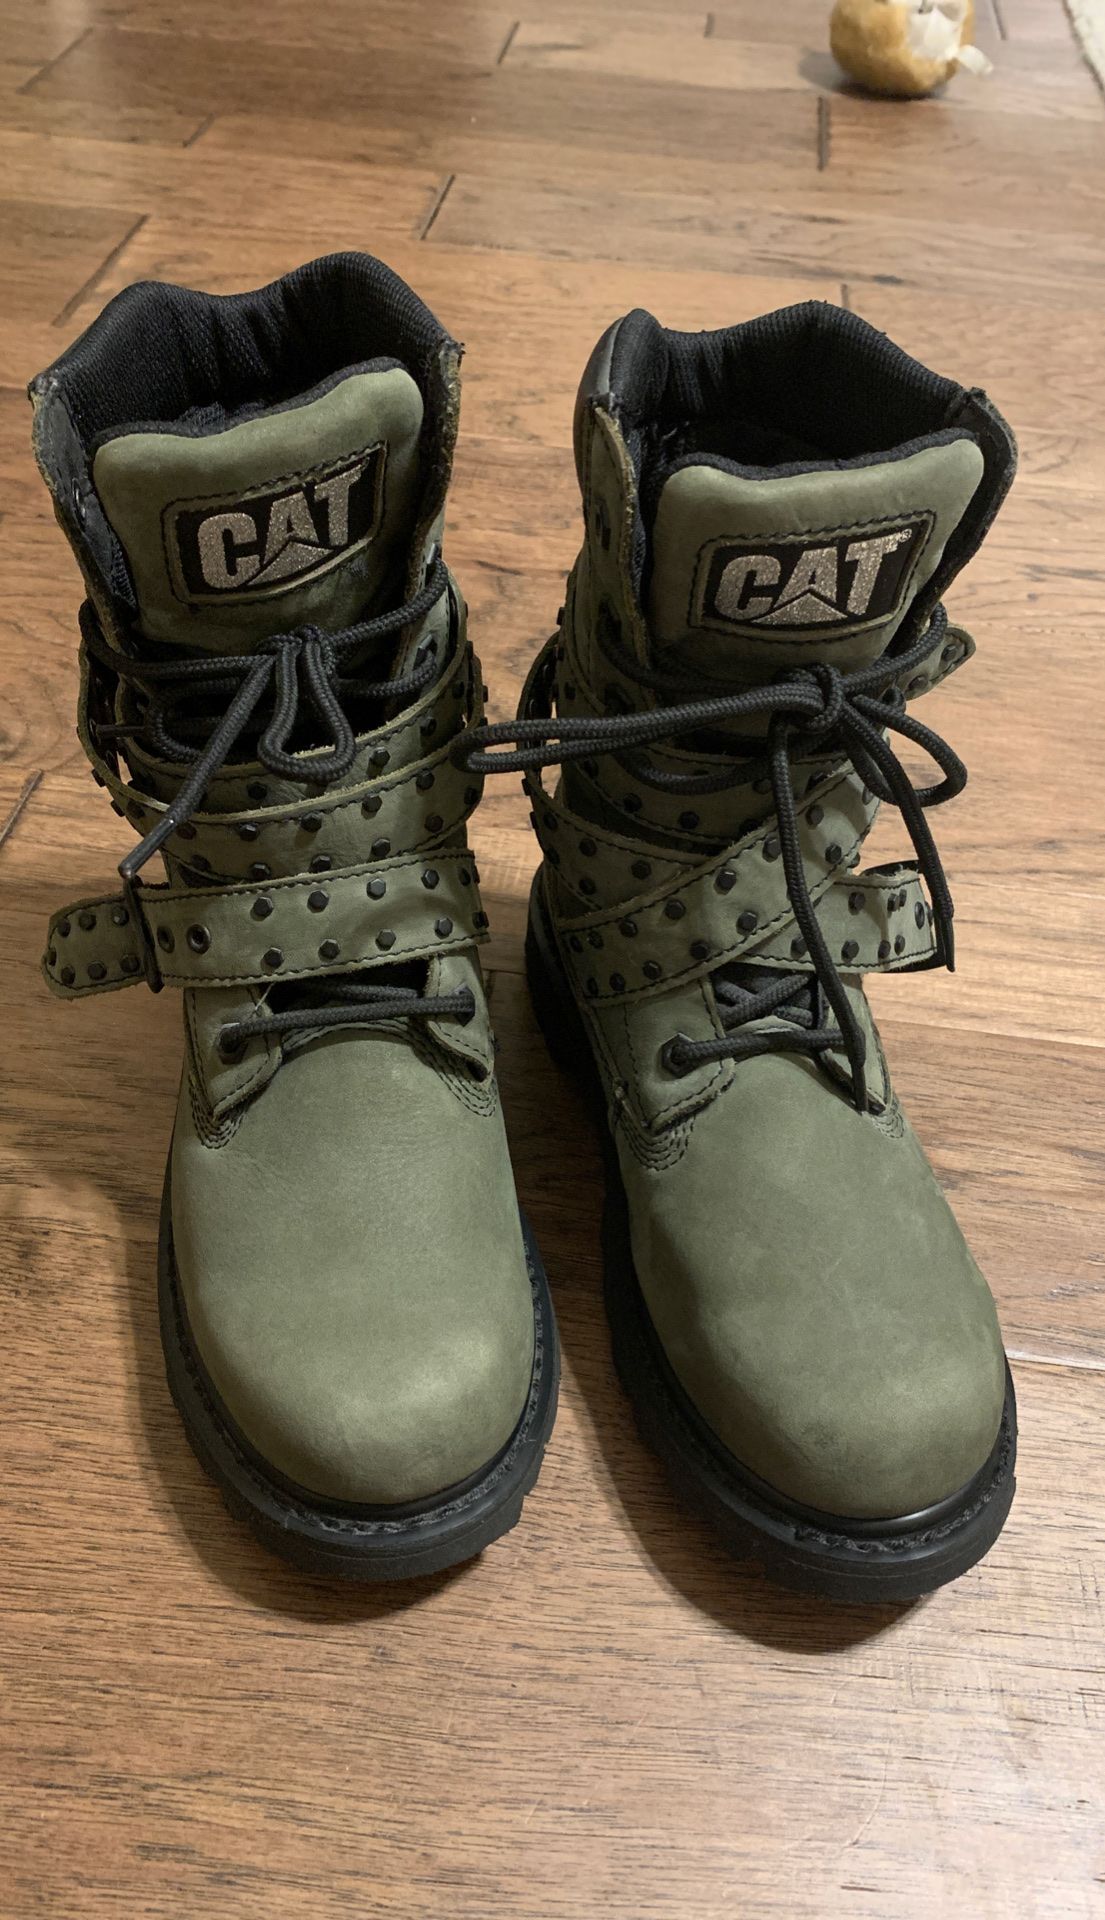 CAT hiking and work boots (women’s) size 7.5